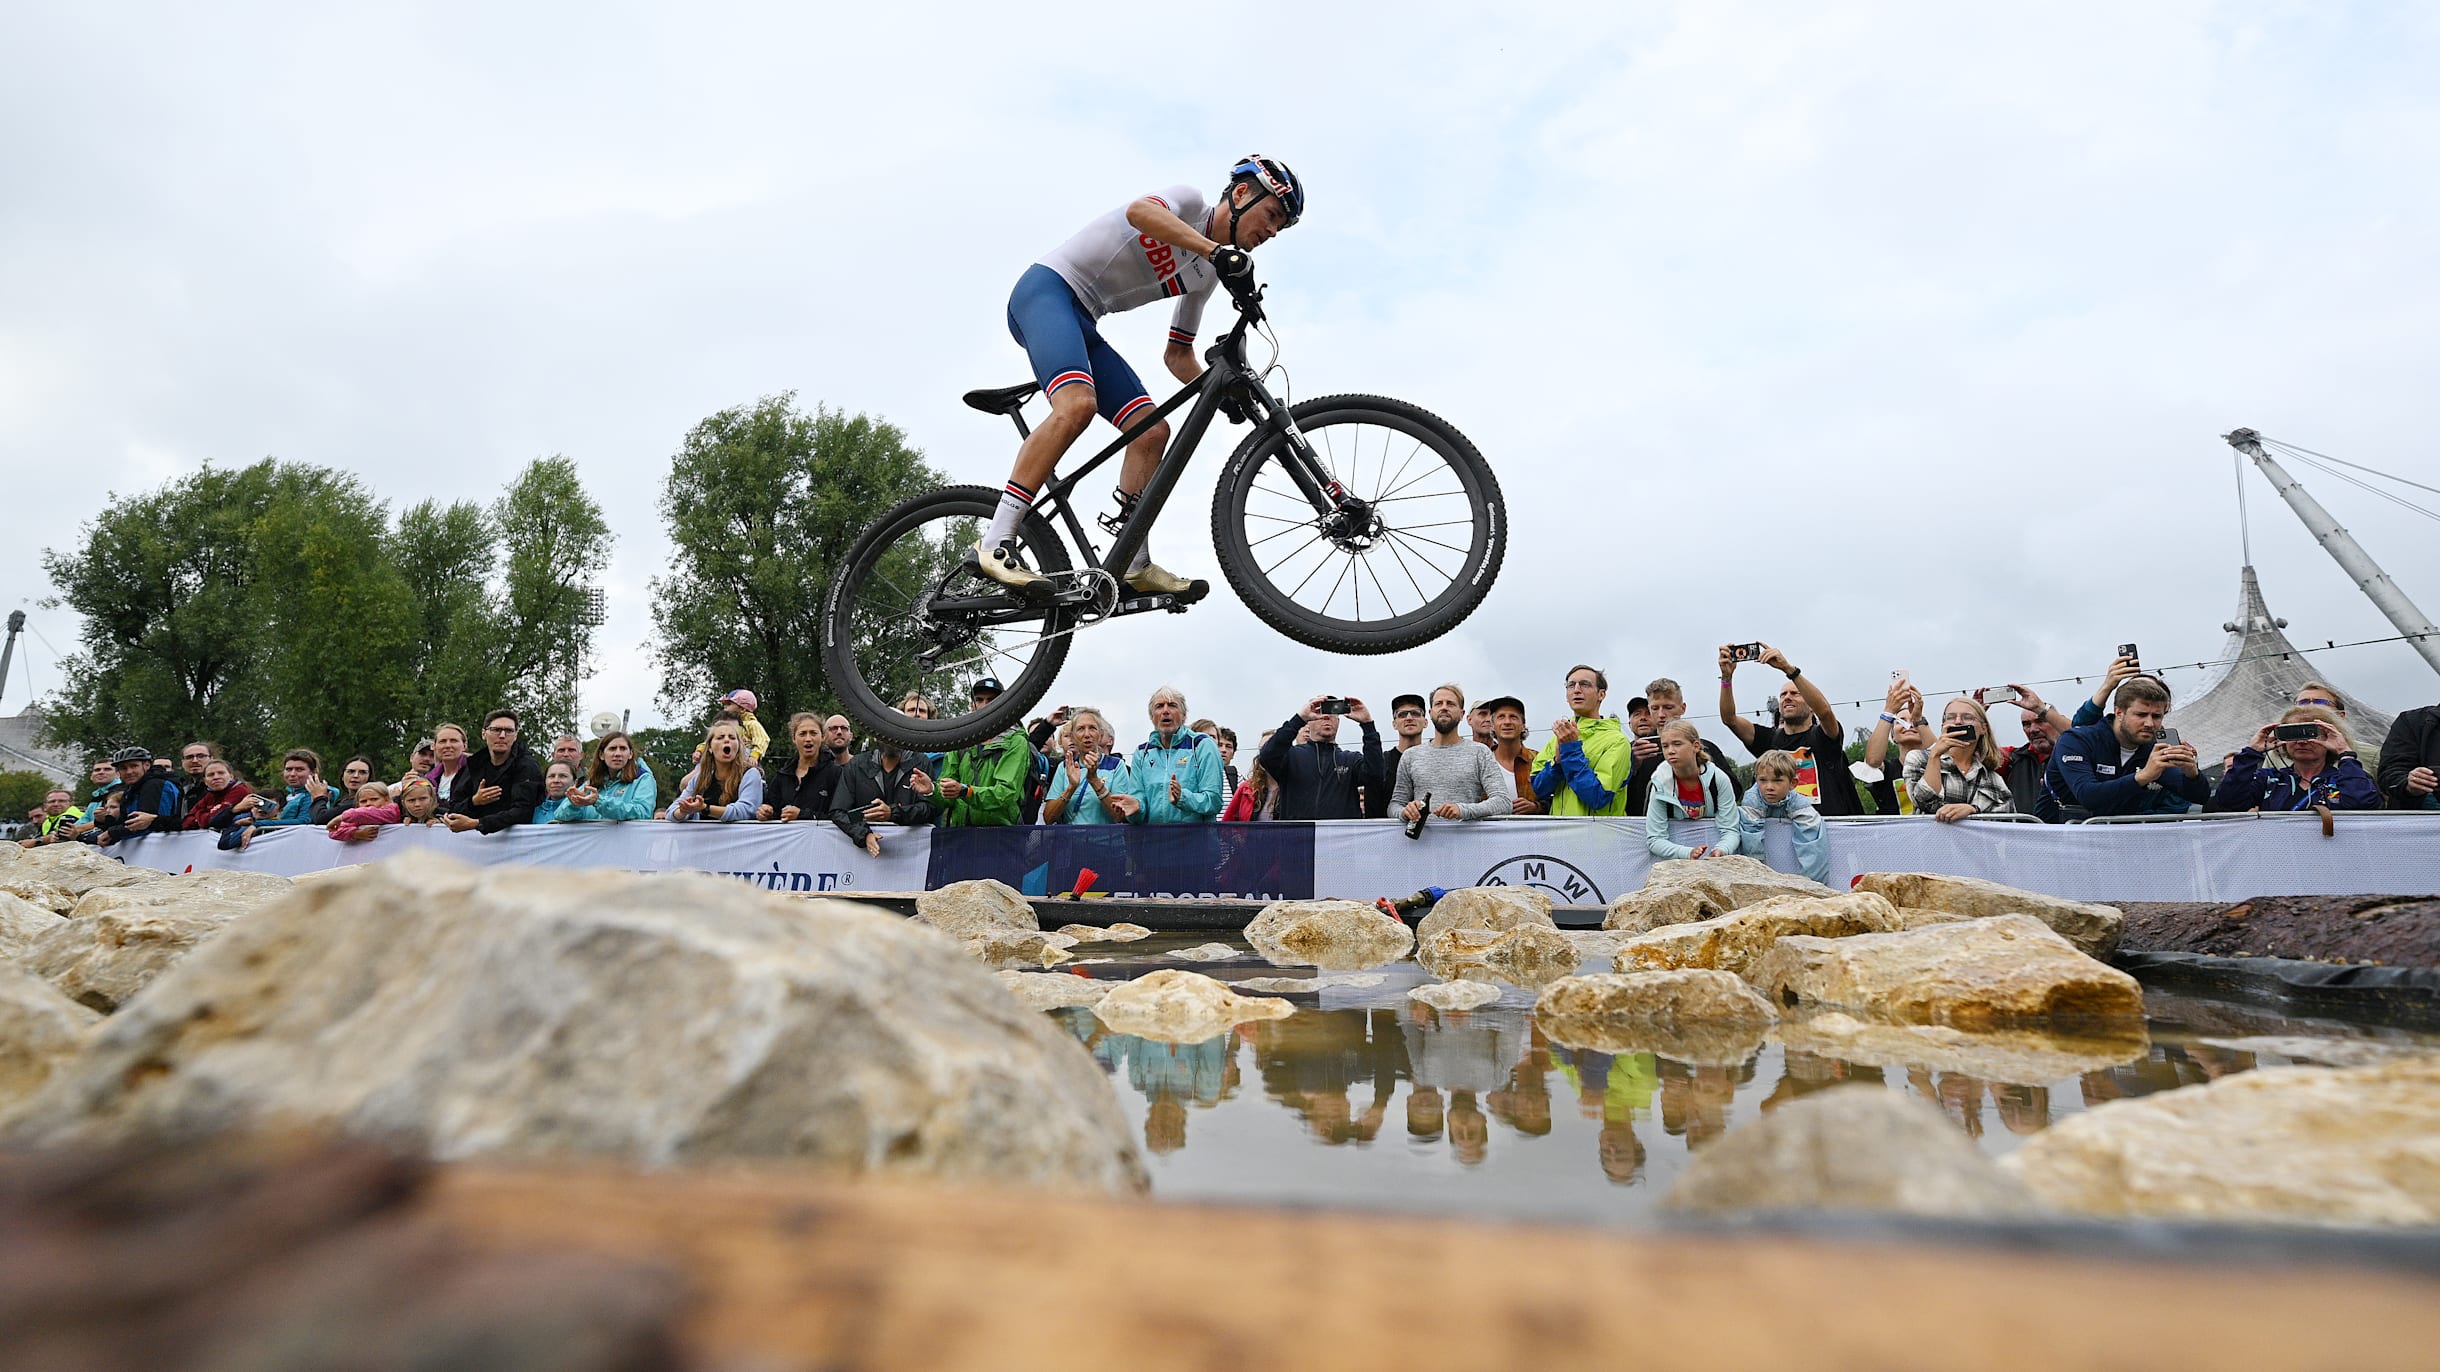 2022 UCI Mountain Bike World Championships in Les Gets, France Preview, schedule, how to watch the stars in action